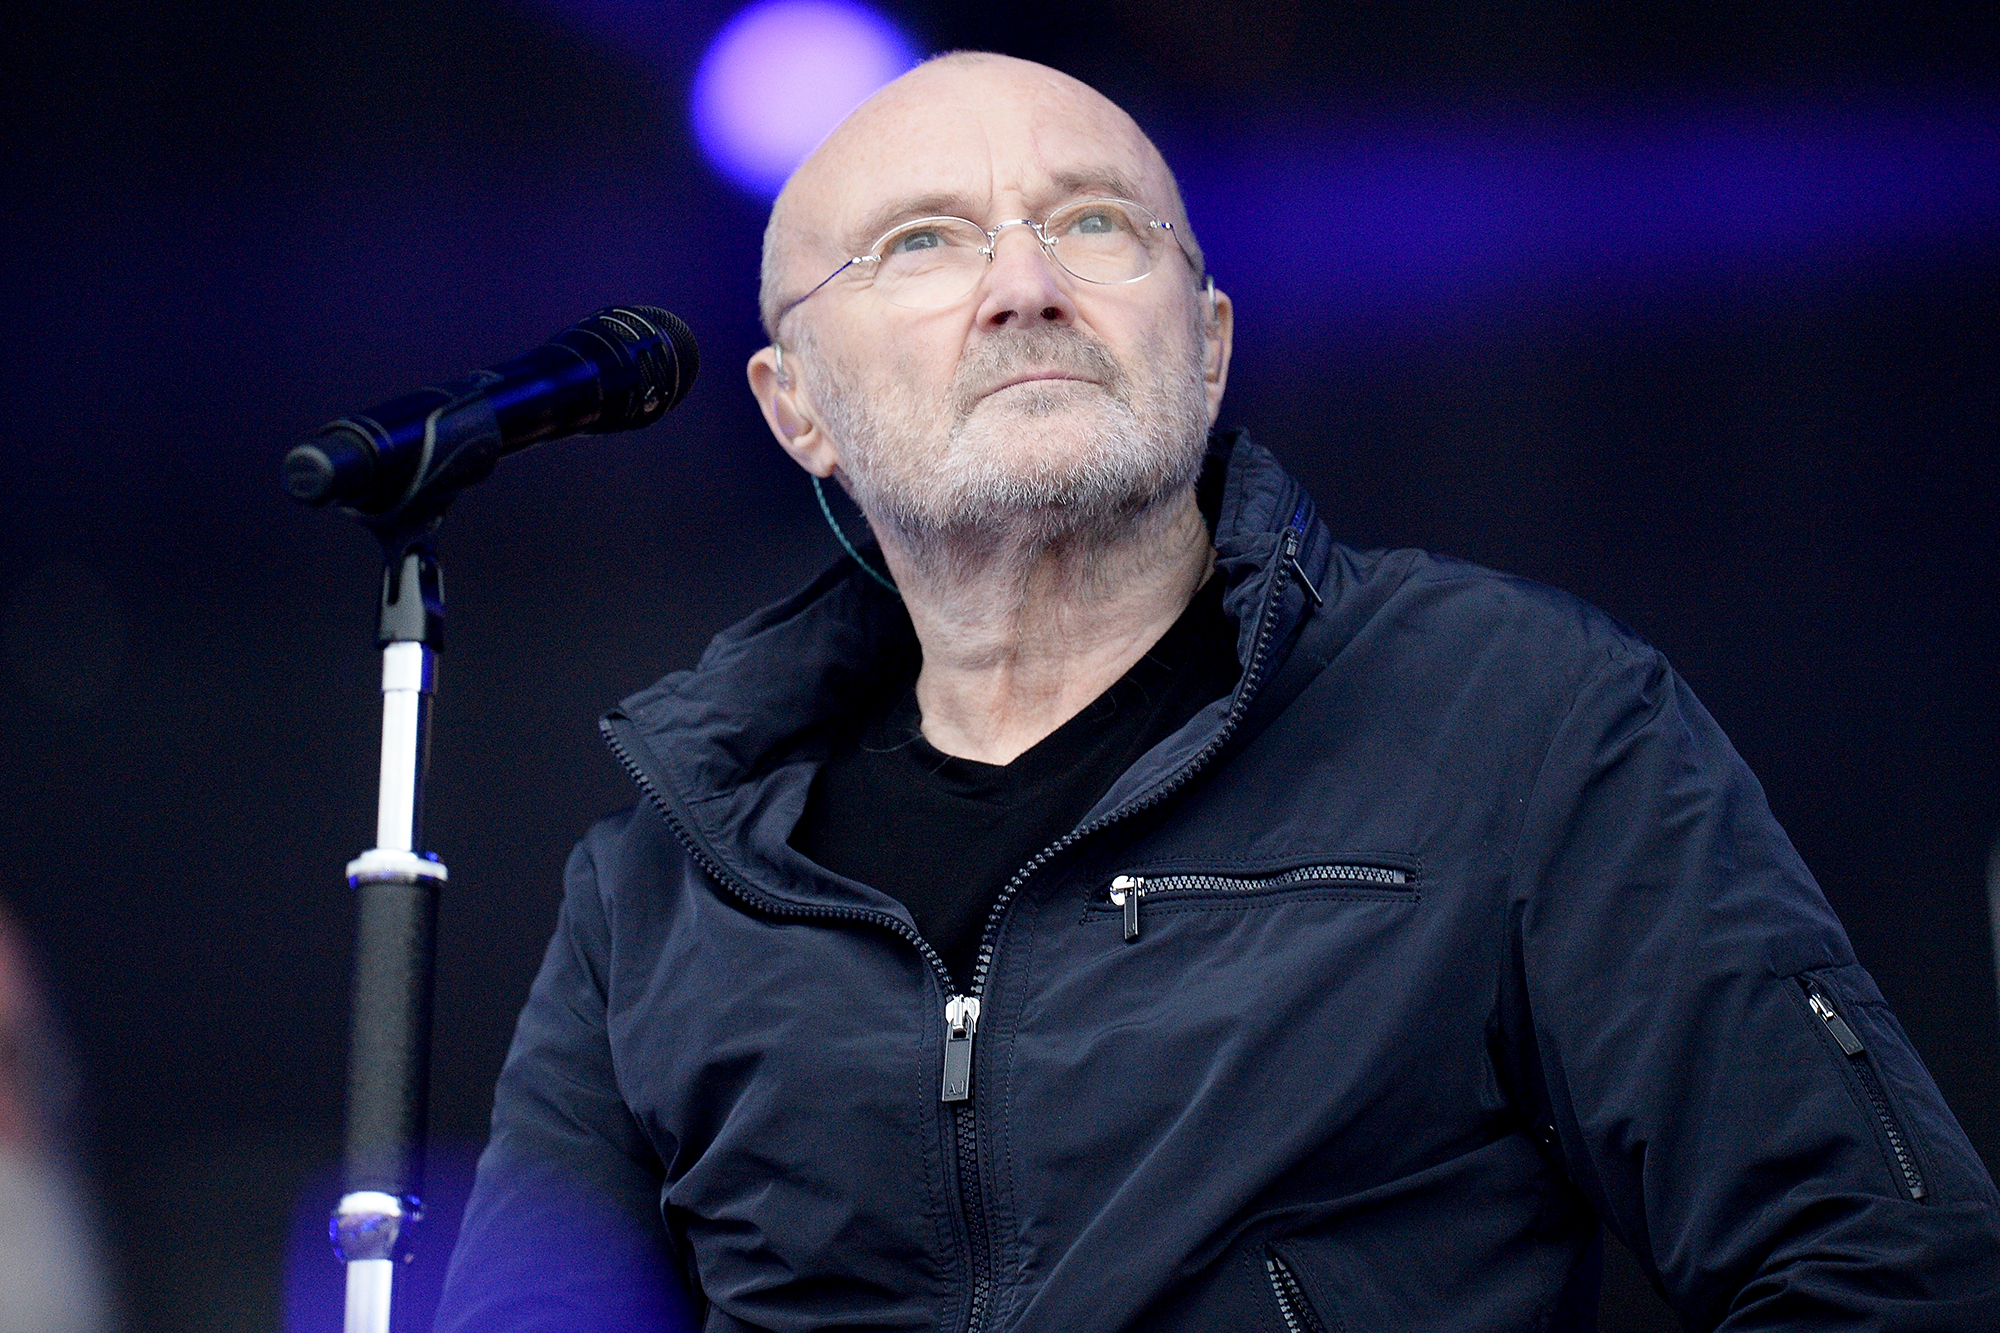 Phil Collins says his health challenges have left him unable to play the drums